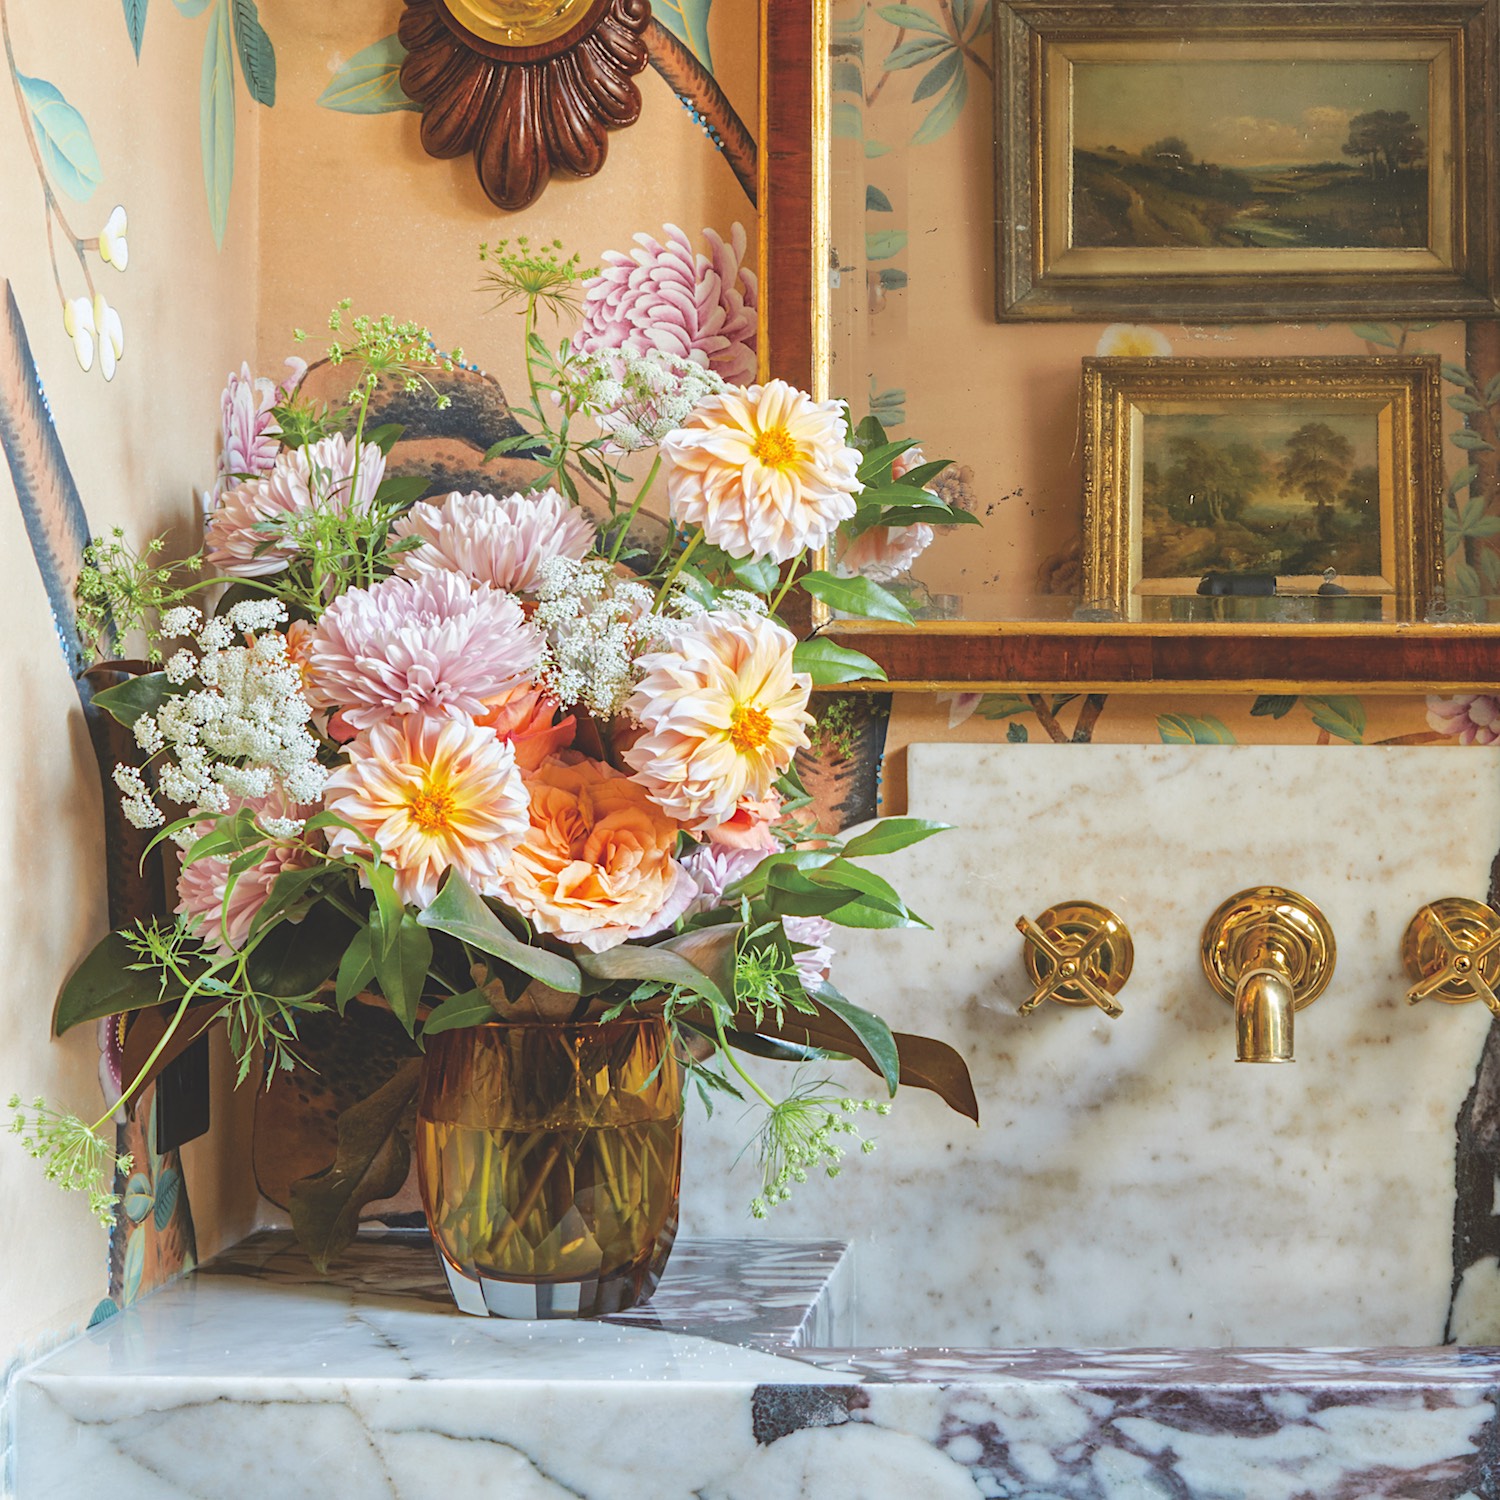 Suzanne Graves arrangement of pink chrysanthemums and peach sherbet dahlias in the gentleman's dressing room